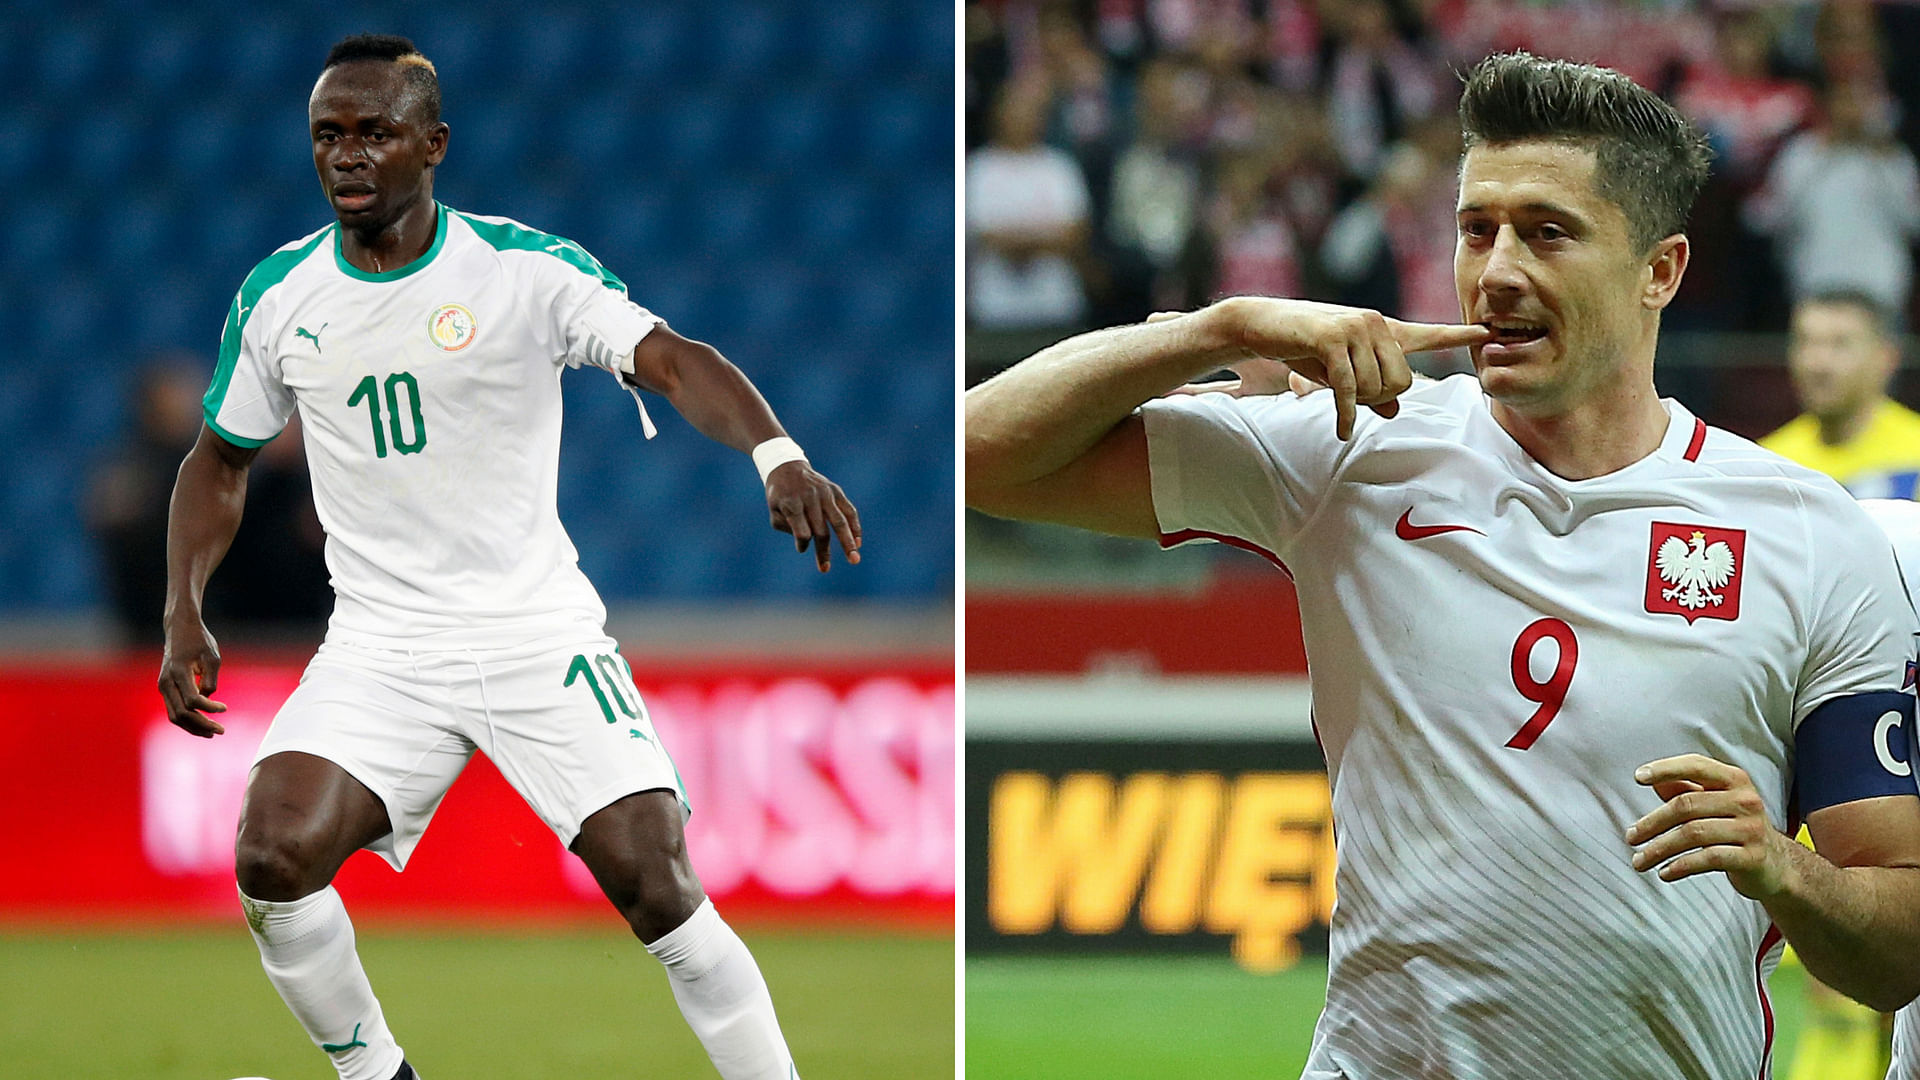 Both forwards will look to be game-changers in their face off. Lewandowski (right) is a prolific striker whereas Mane plays across the front of the formation.